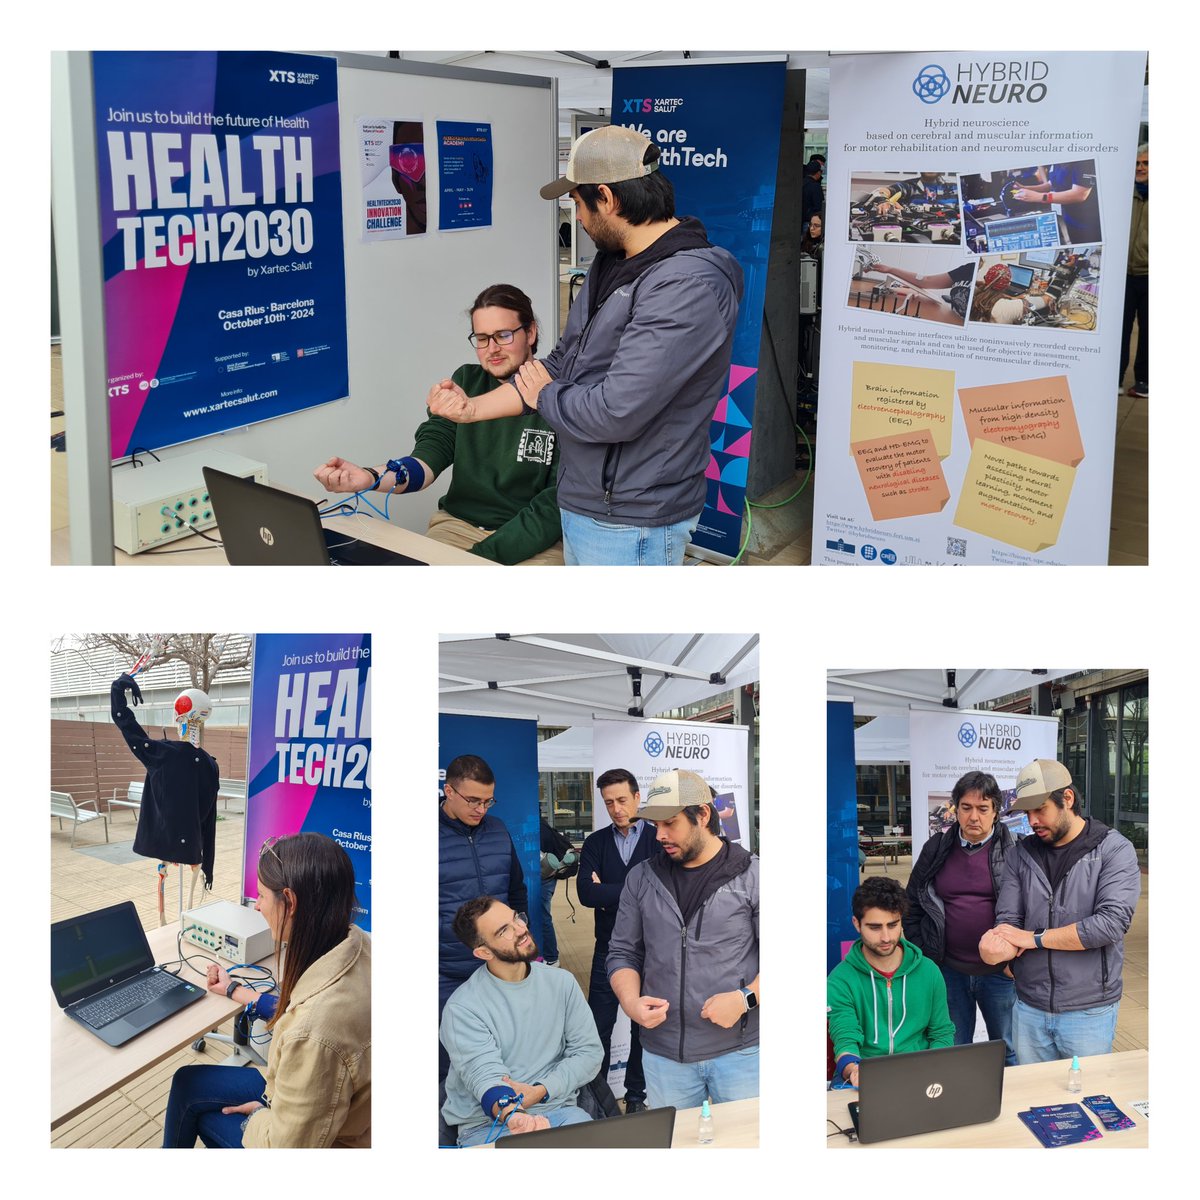 BIOART assisted to the Research Event, an initiative organized by @ETSEIB_UPC and addressed to students. We presented our Myosleeve technology that uses EMG to enhance the muscular rehabilitation process using serious games.
@hybridneuro #EMG #rehabilitation #innovation